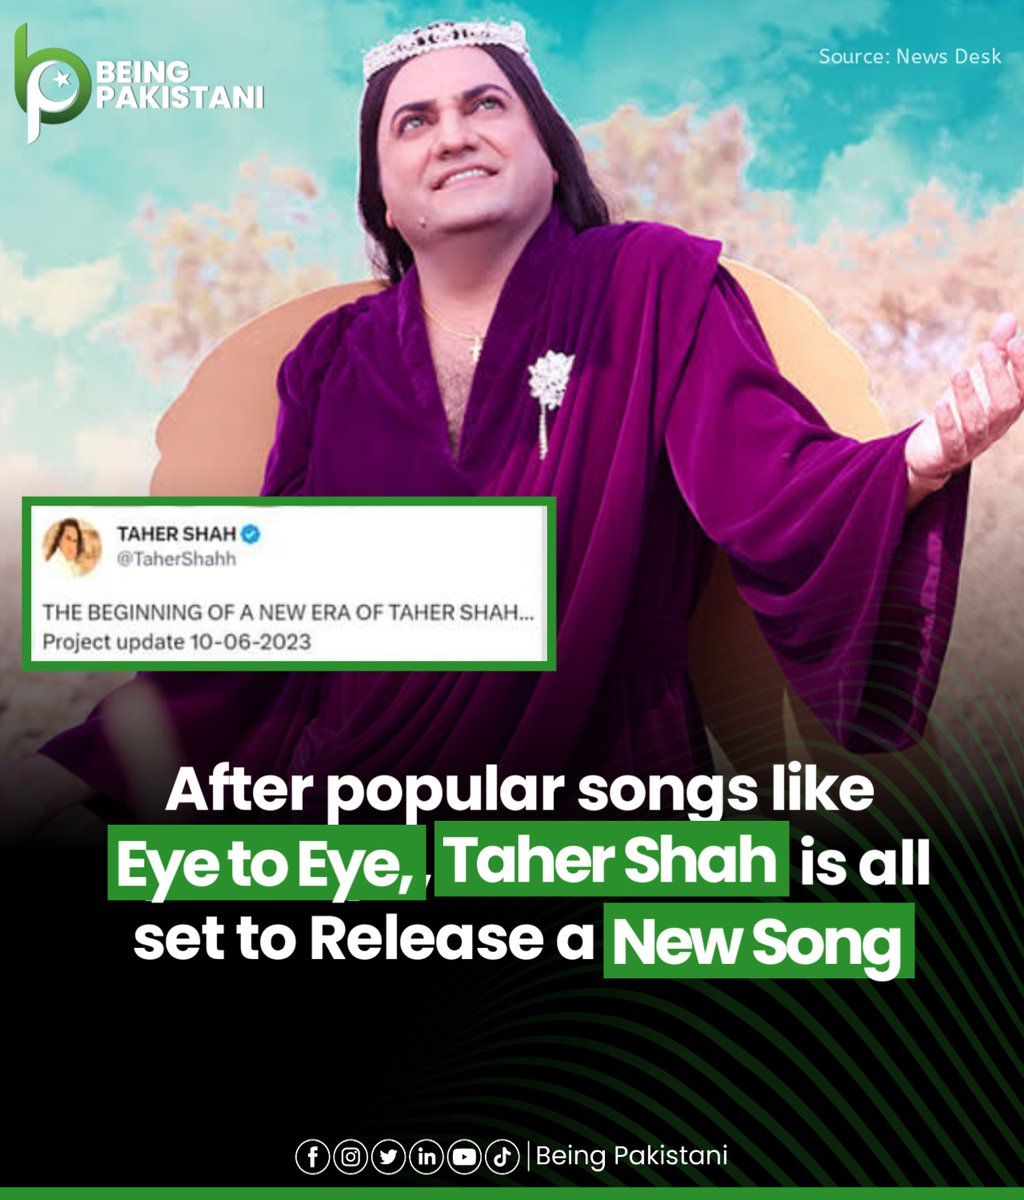 Are you Ready? The iconic and viral singer Taher Shah who's known for his unique way of singing style has announced his comeback regarding an upcoming release.

#BeingPakistani #TaherShah #EyetoEye #Angel #dhinchekpooja #selfie #tiktok #popular #instagram #trending